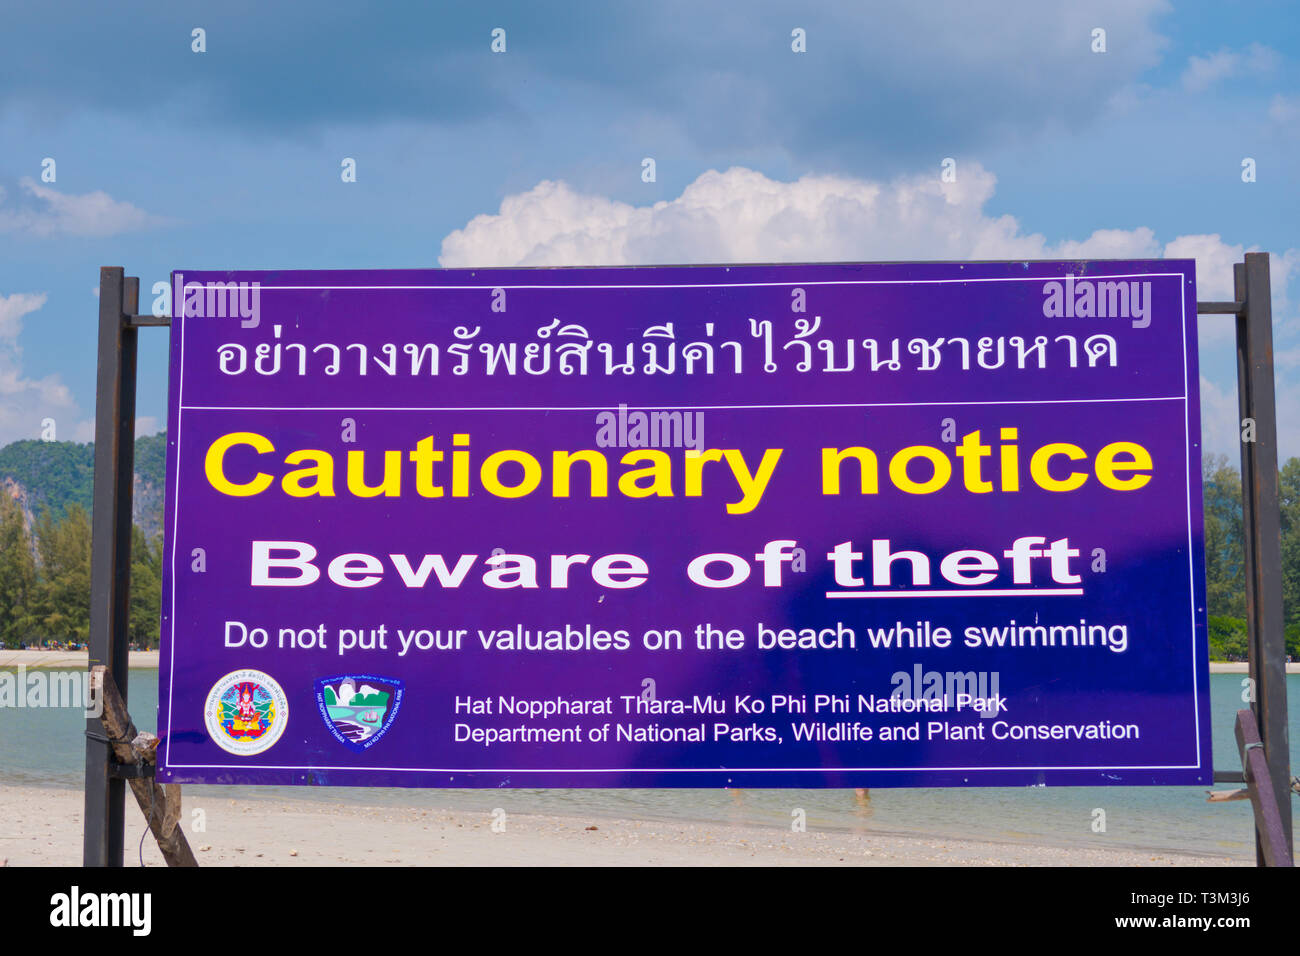 Warning sign about theft on the beach, Hat Noppharat Thara, Krabi province, Thailand Stock Photo